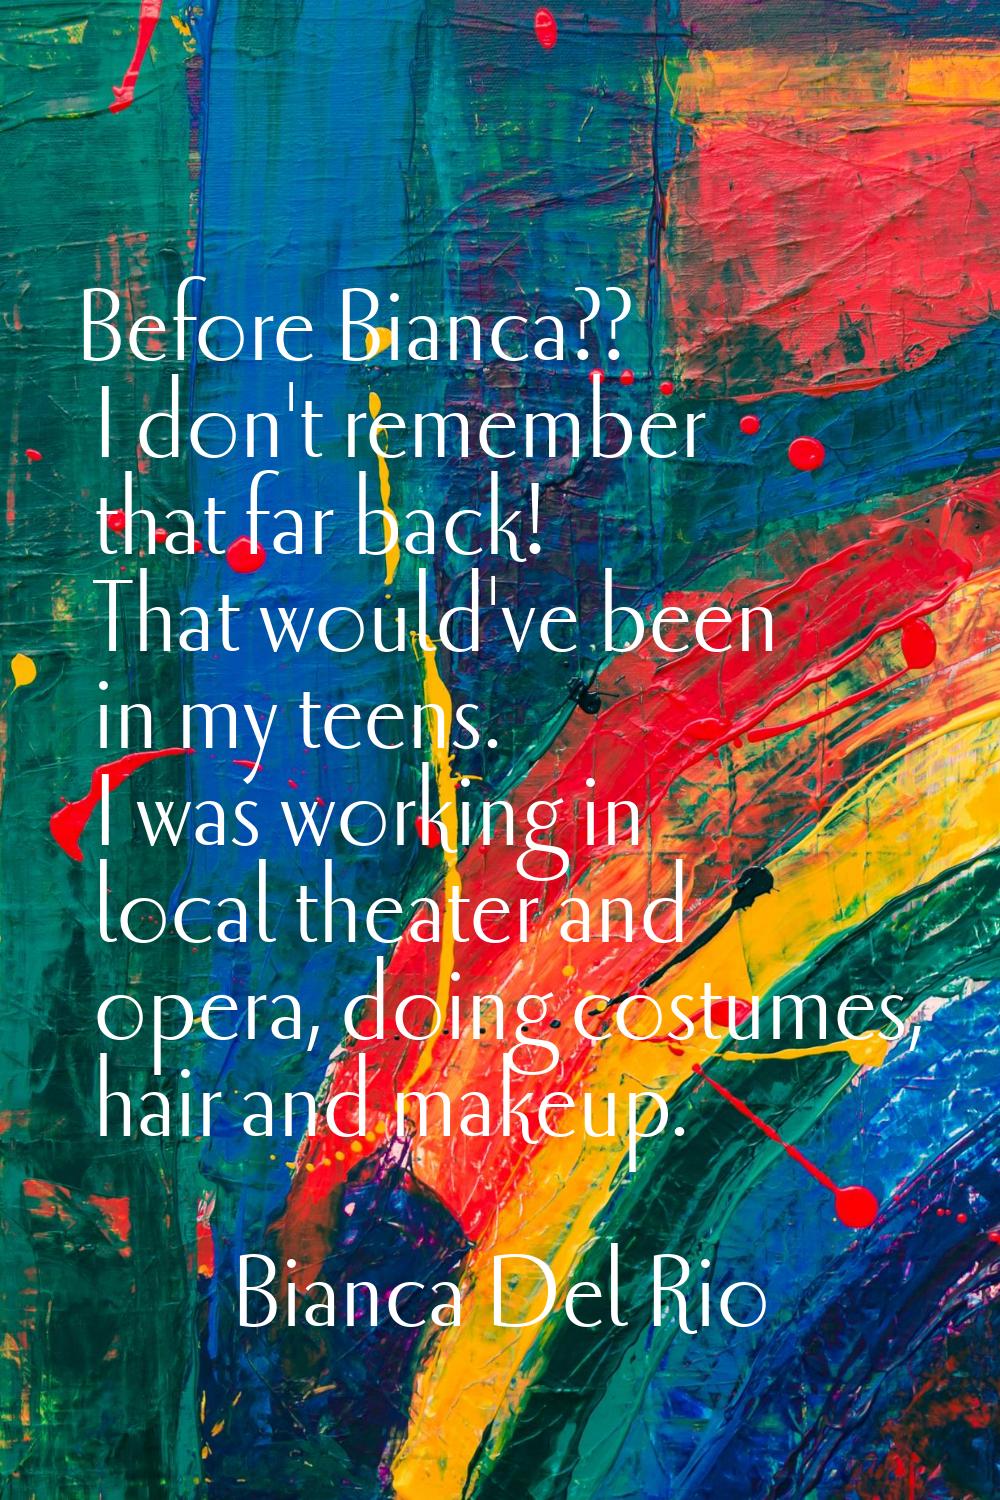 Before Bianca?? I don't remember that far back! That would've been in my teens. I was working in lo